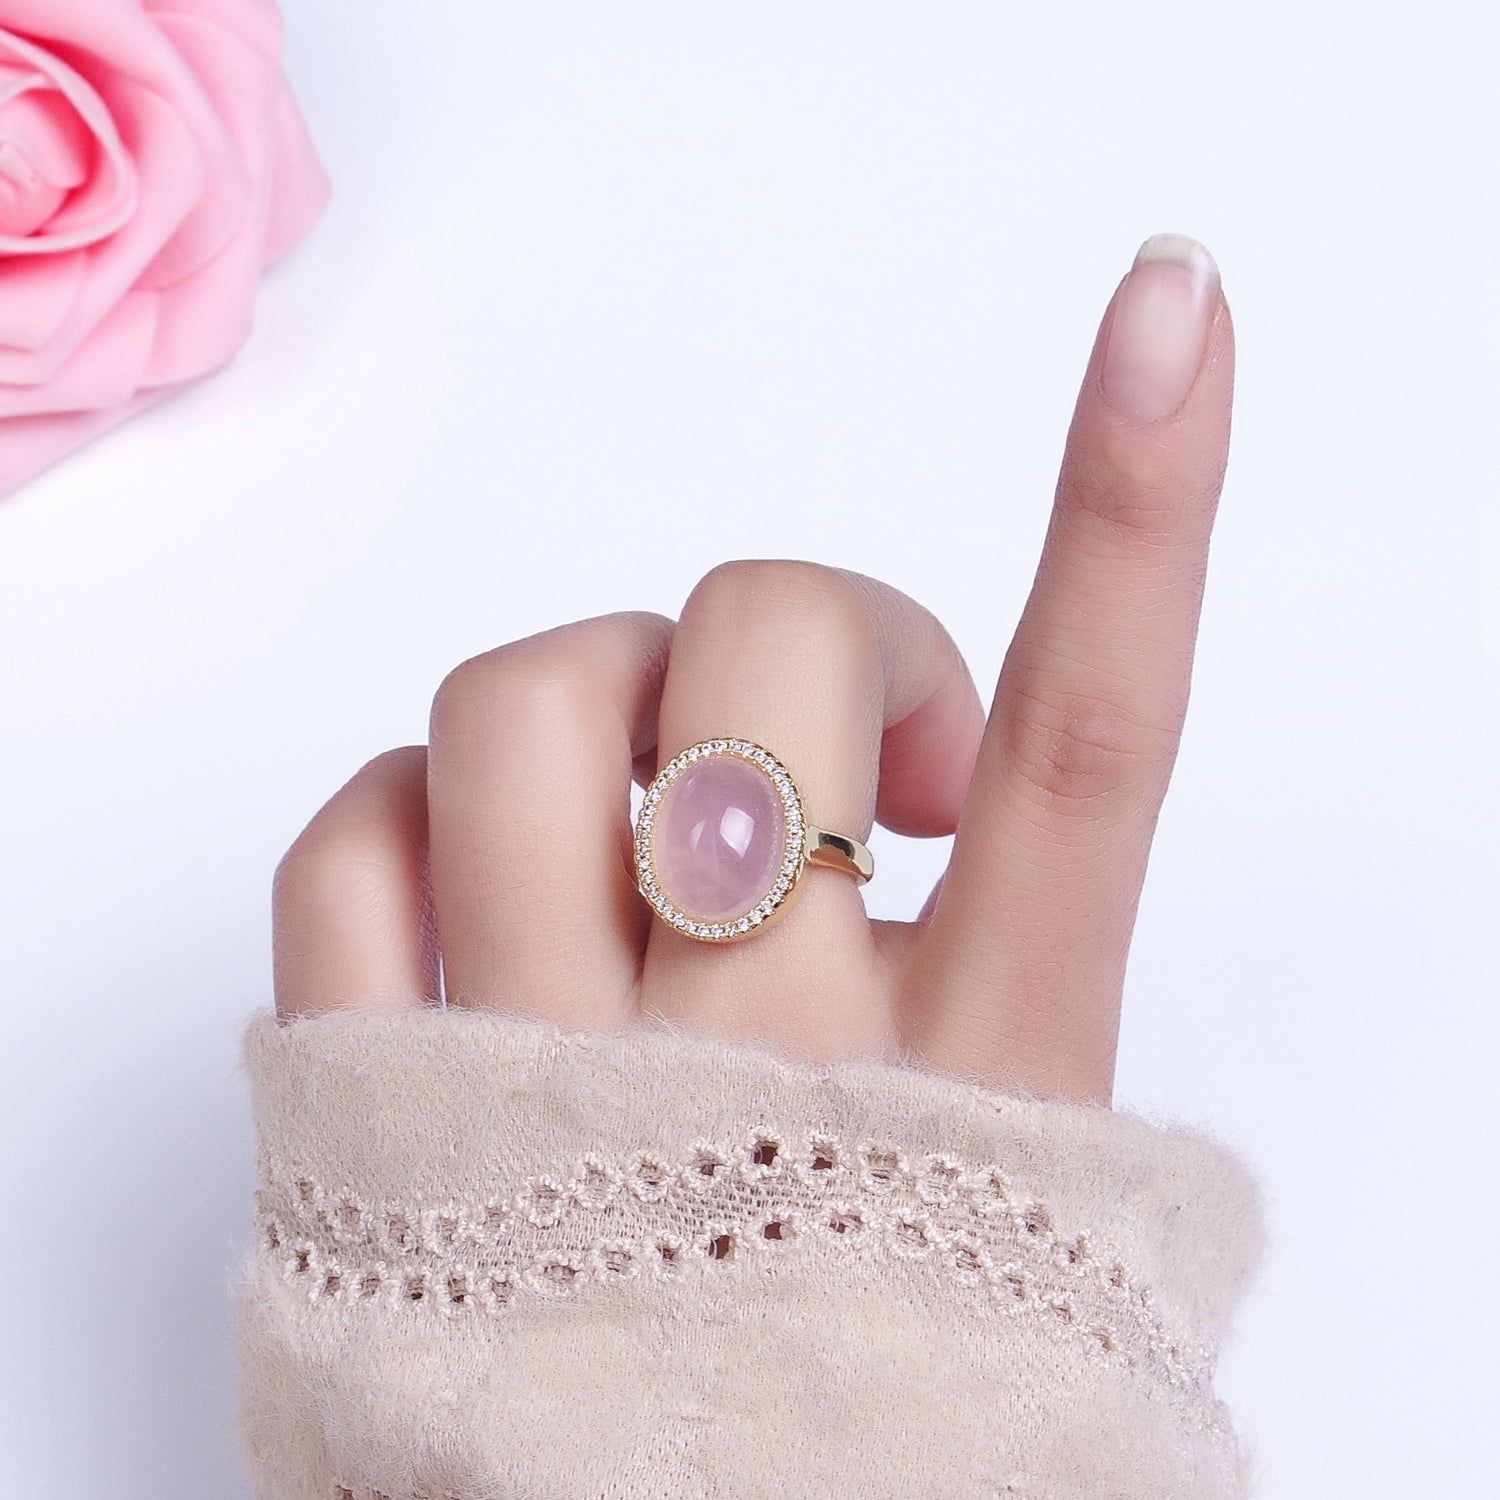 Micro Pave Healing Crystal Ring Rose Quartz Stone Ring in 24k Gold Filled Adjustable Ring AA1356 - DLUXCA